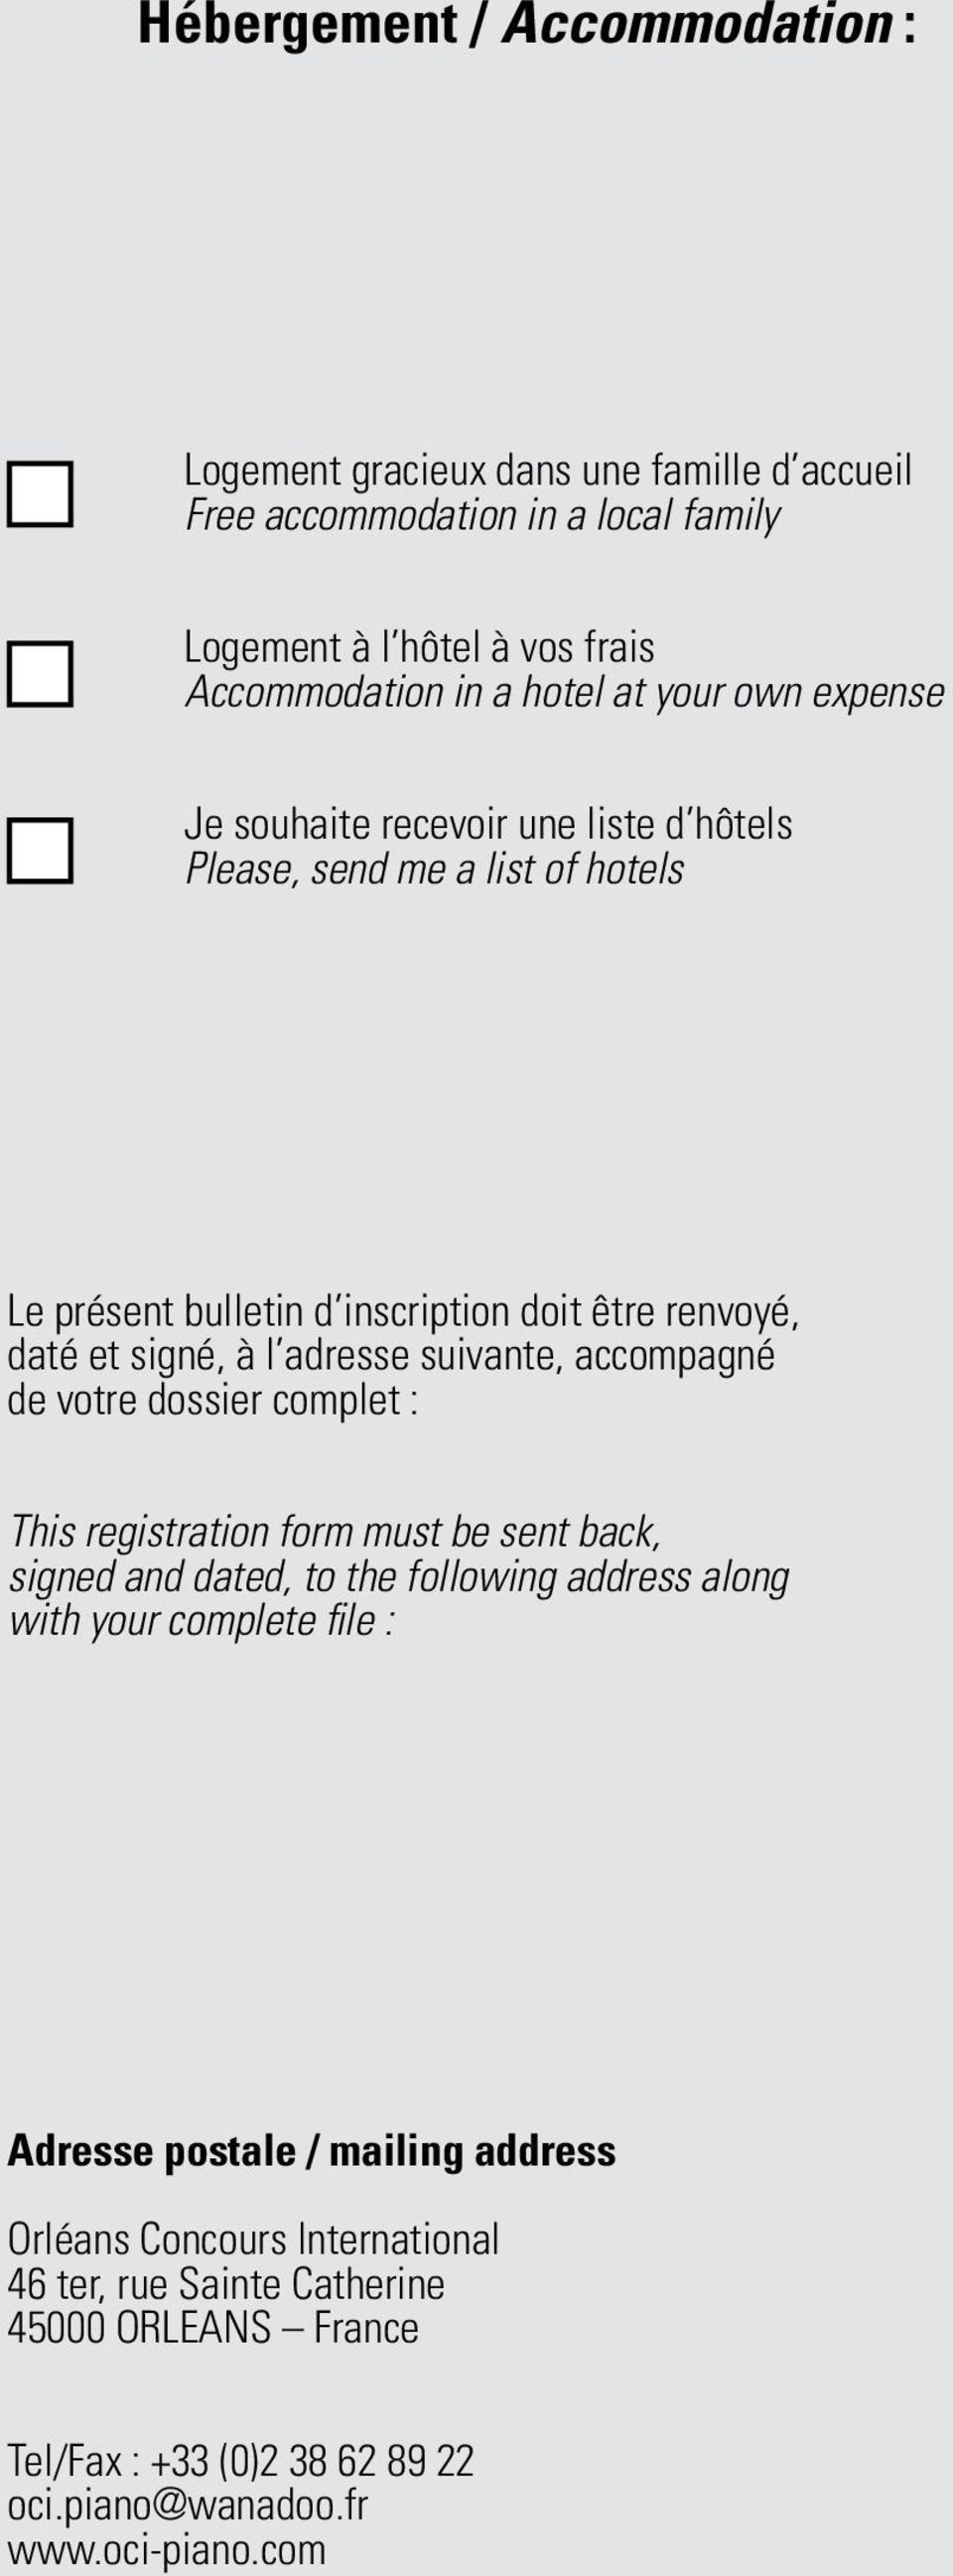 suivante, accompagné de votre dossier complet : This registration form must be sent back, signed and dated, to the following address along with your complete file : Adresse